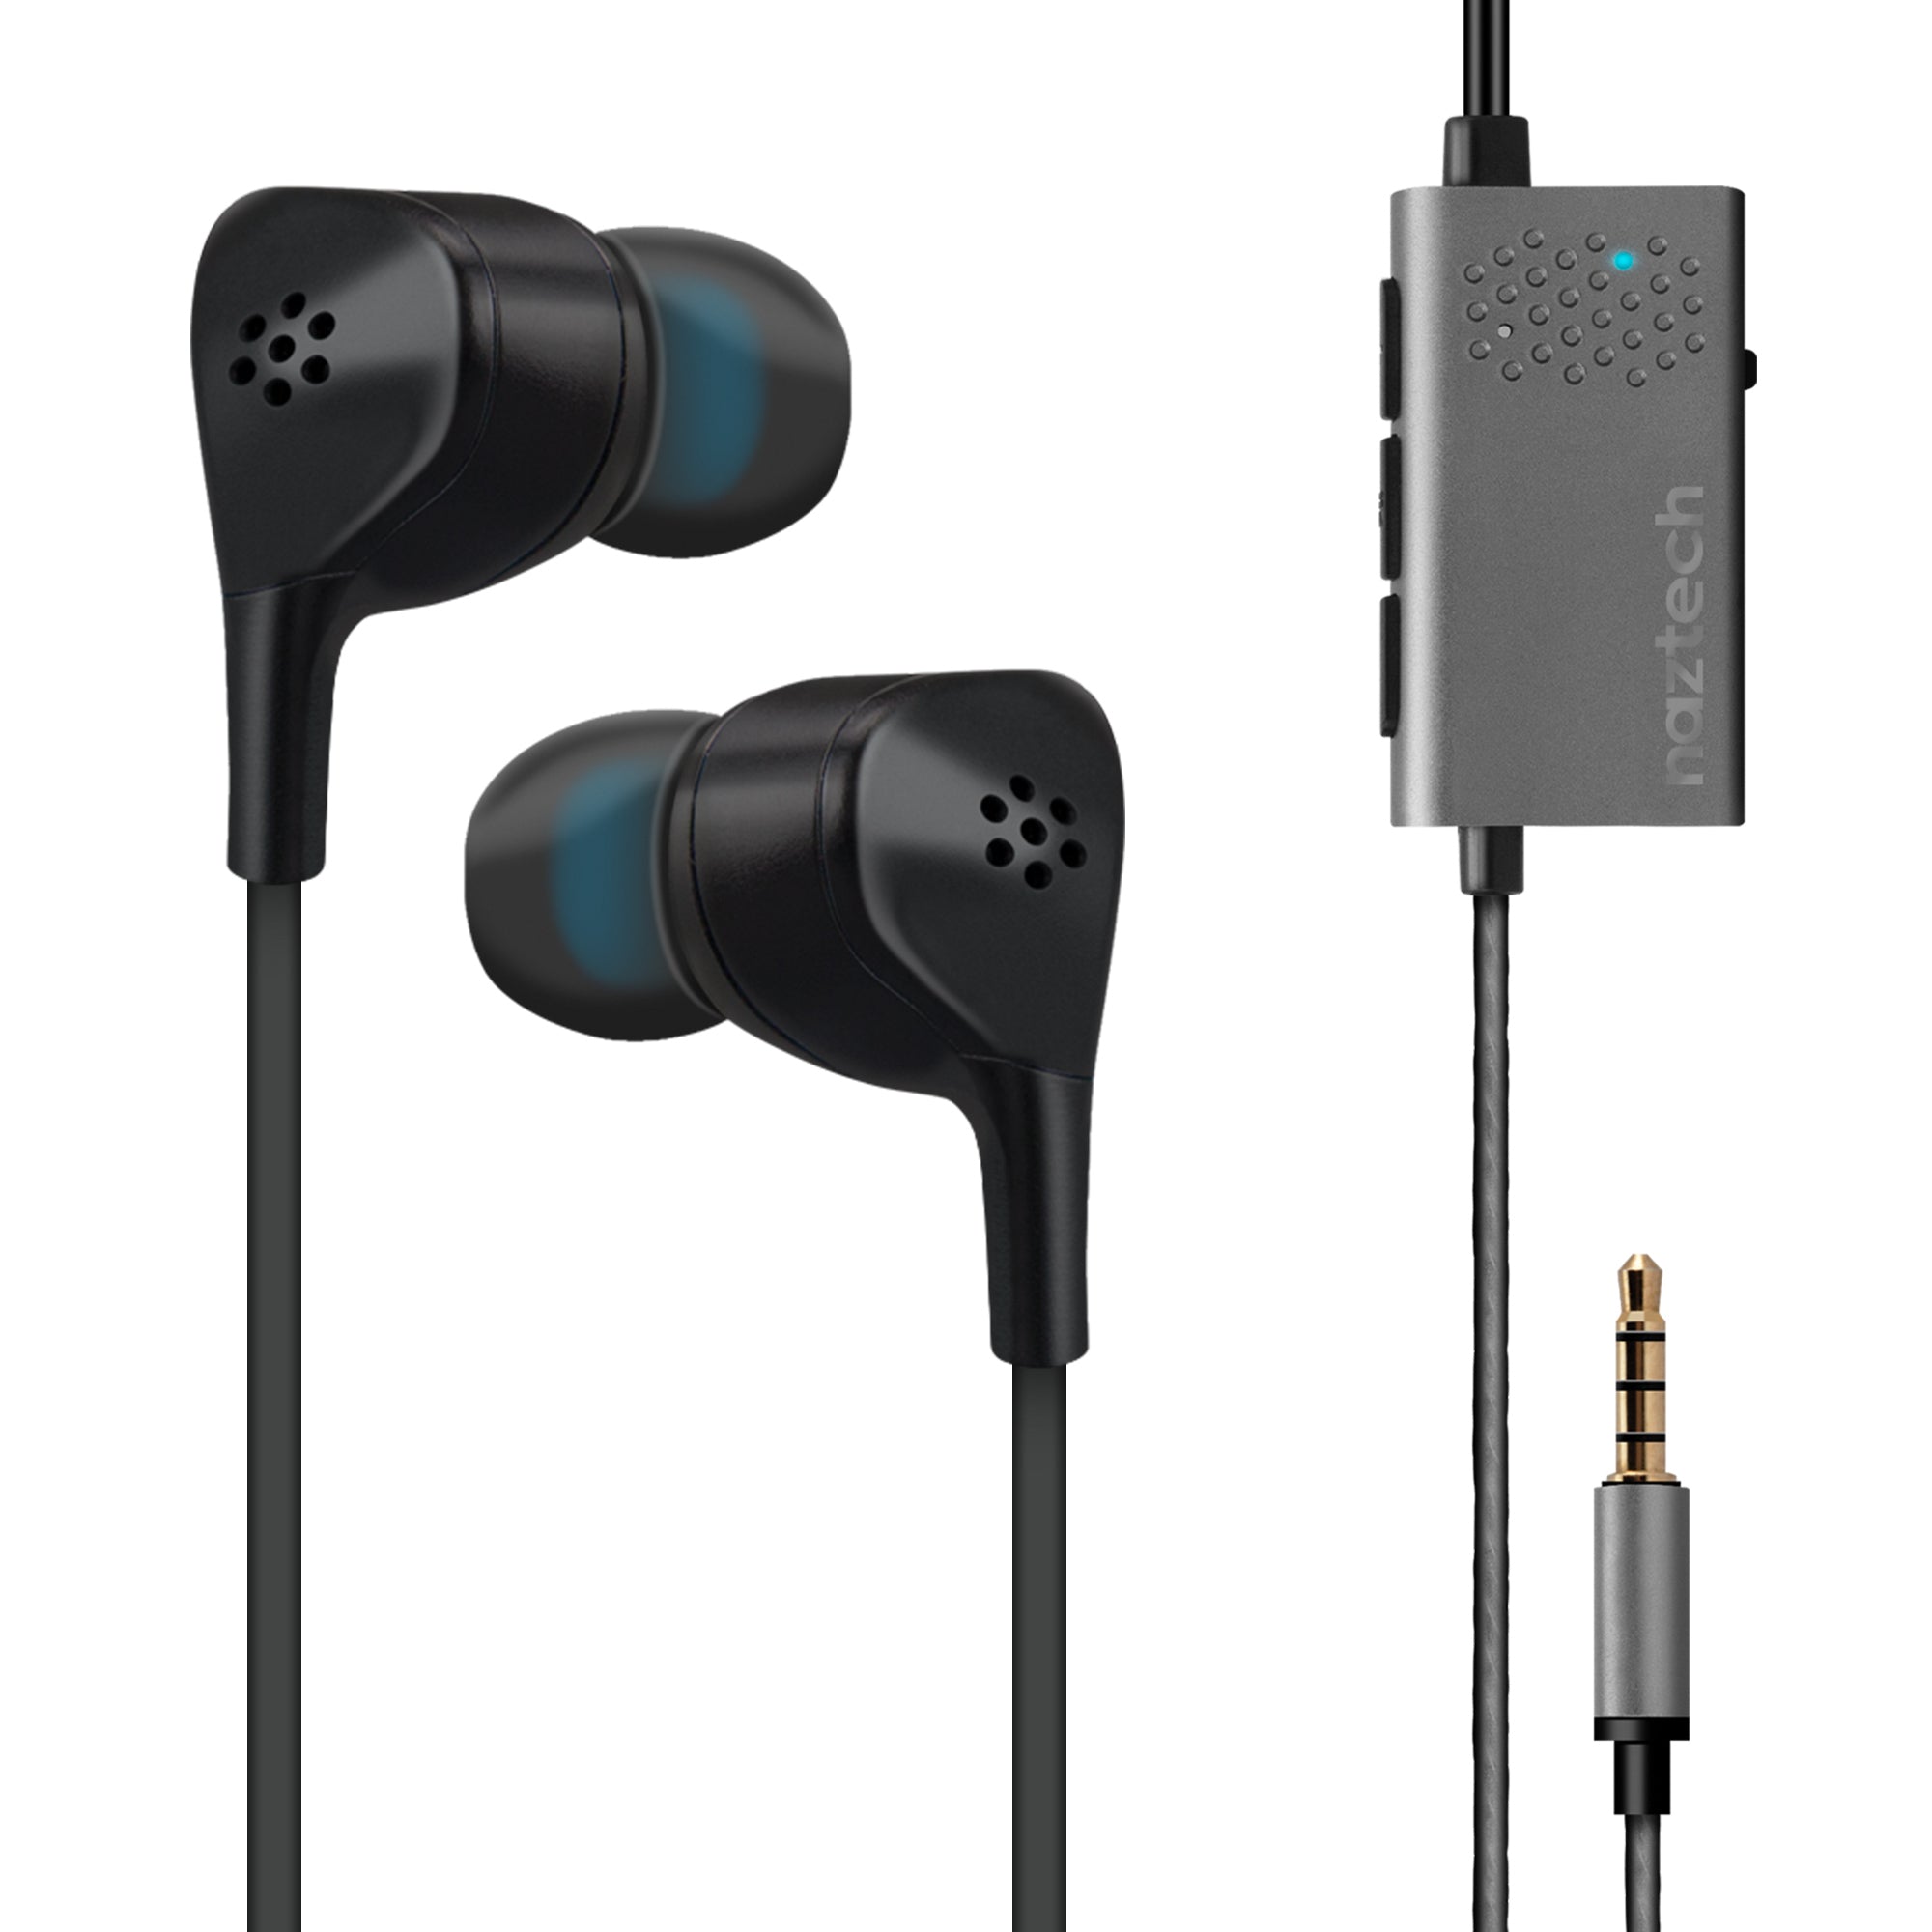 Naztech X1 Active Noise Cancelling Wired Earbuds – TripQuipment